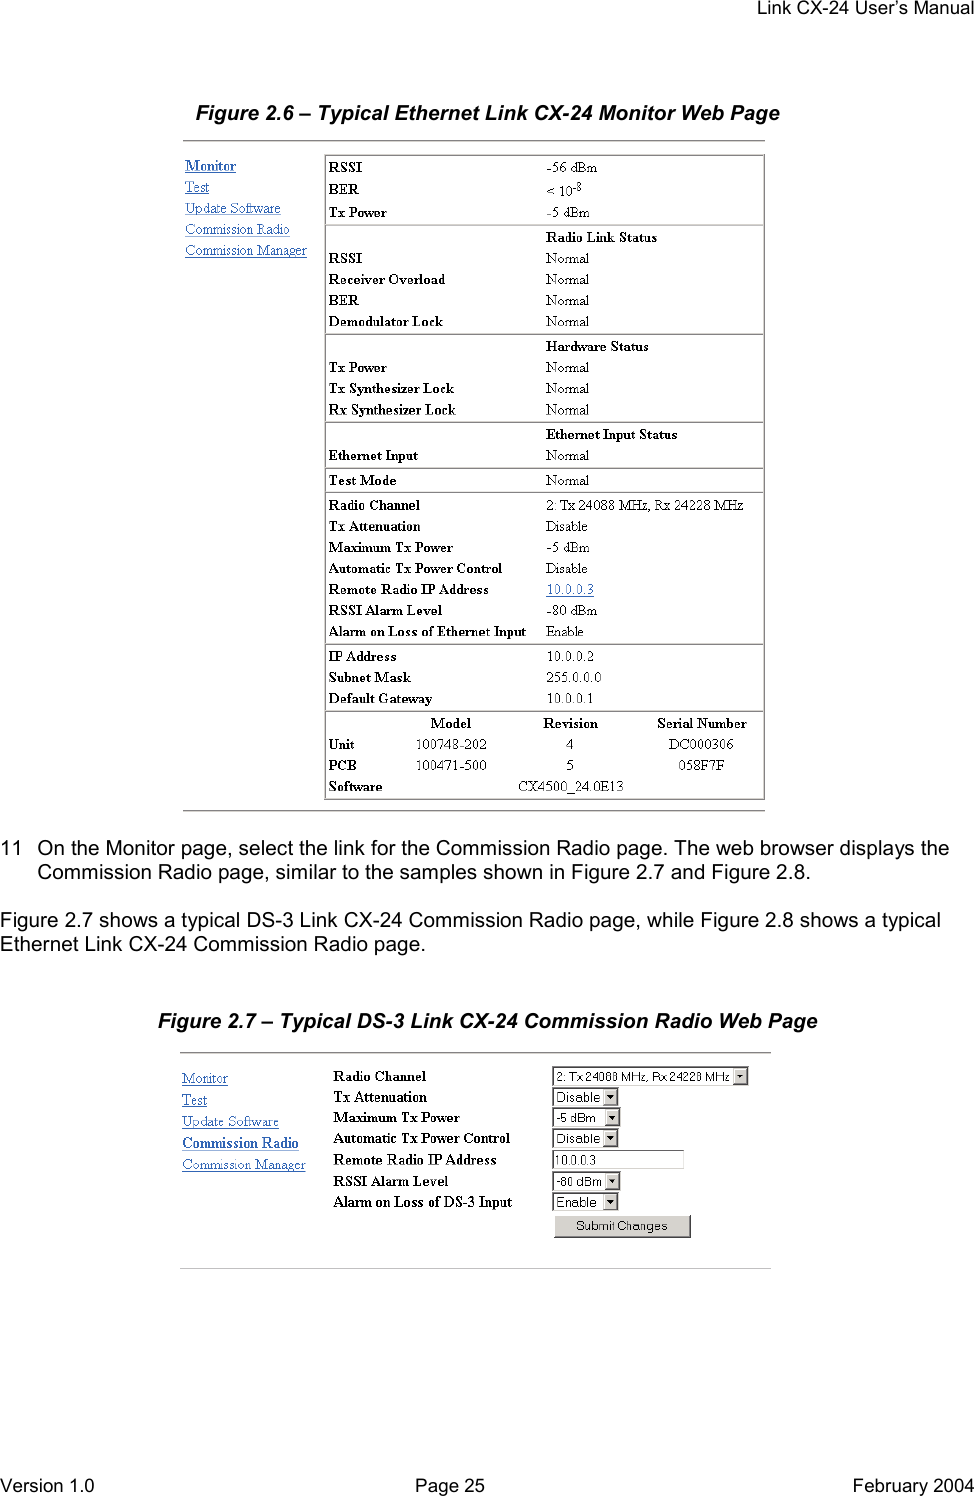     Link CX-24 User’s Manual Version 1.0  Page 25  February 2004 Figure 2.6 – Typical Ethernet Link CX-24 Monitor Web Page   11  On the Monitor page, select the link for the Commission Radio page. The web browser displays the Commission Radio page, similar to the samples shown in Figure 2.7 and Figure 2.8.  Figure 2.7 shows a typical DS-3 Link CX-24 Commission Radio page, while Figure 2.8 shows a typical Ethernet Link CX-24 Commission Radio page.  Figure 2.7 – Typical DS-3 Link CX-24 Commission Radio Web Page  